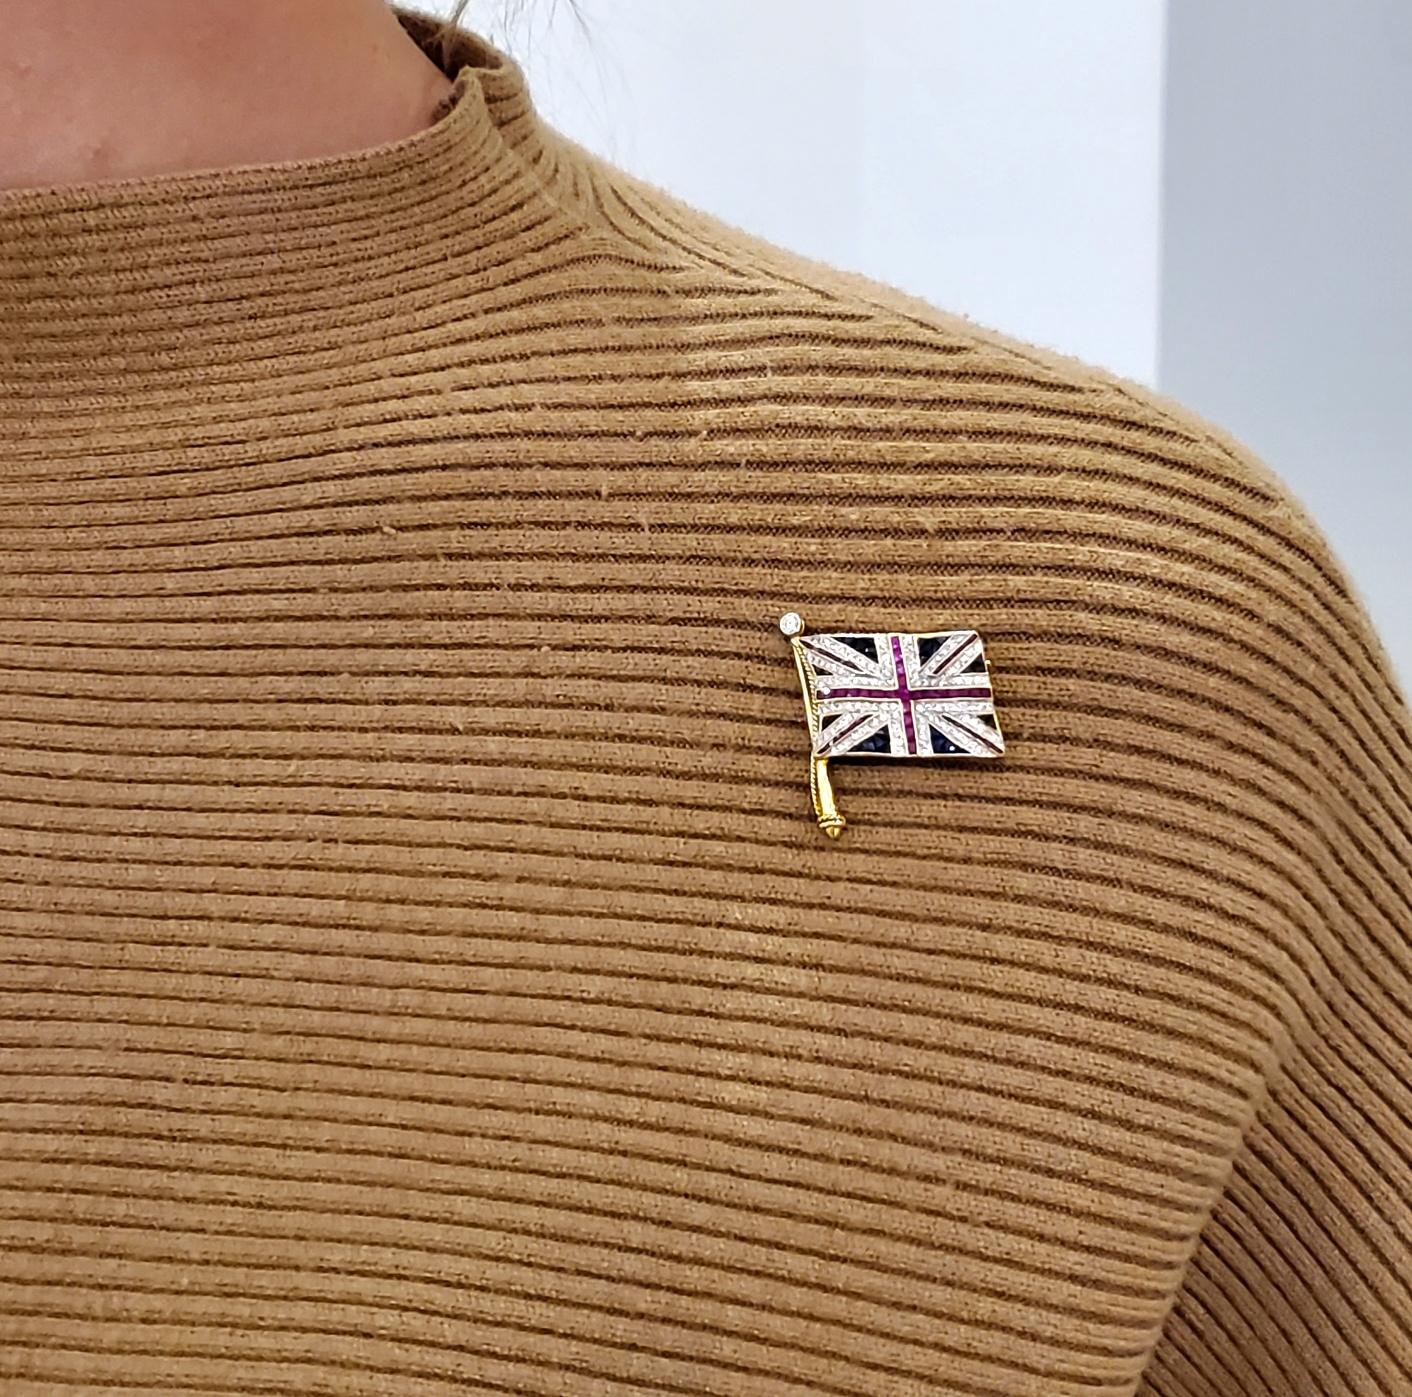 Art deco British flag convertible pendant brooch.

Magnificent piece created in London England during the art deco period, back in the 1930. This gorgeous convertible pendant and brooch, has been carefully crafted in the shape of the United Kingdom